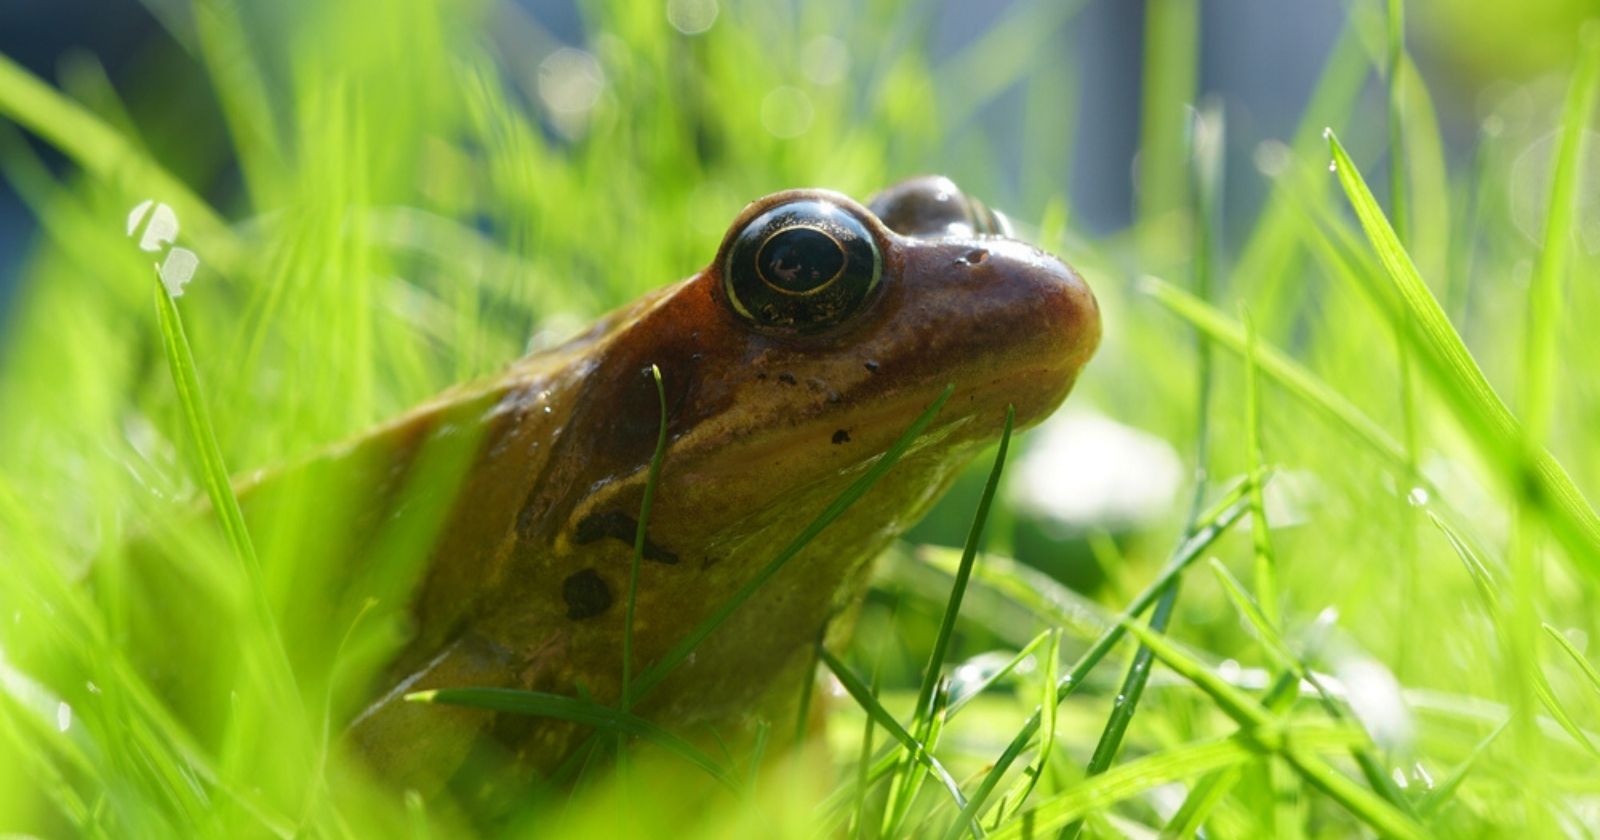 How to welcome and protect frogs in the garden?  5 easy tips to adopt.